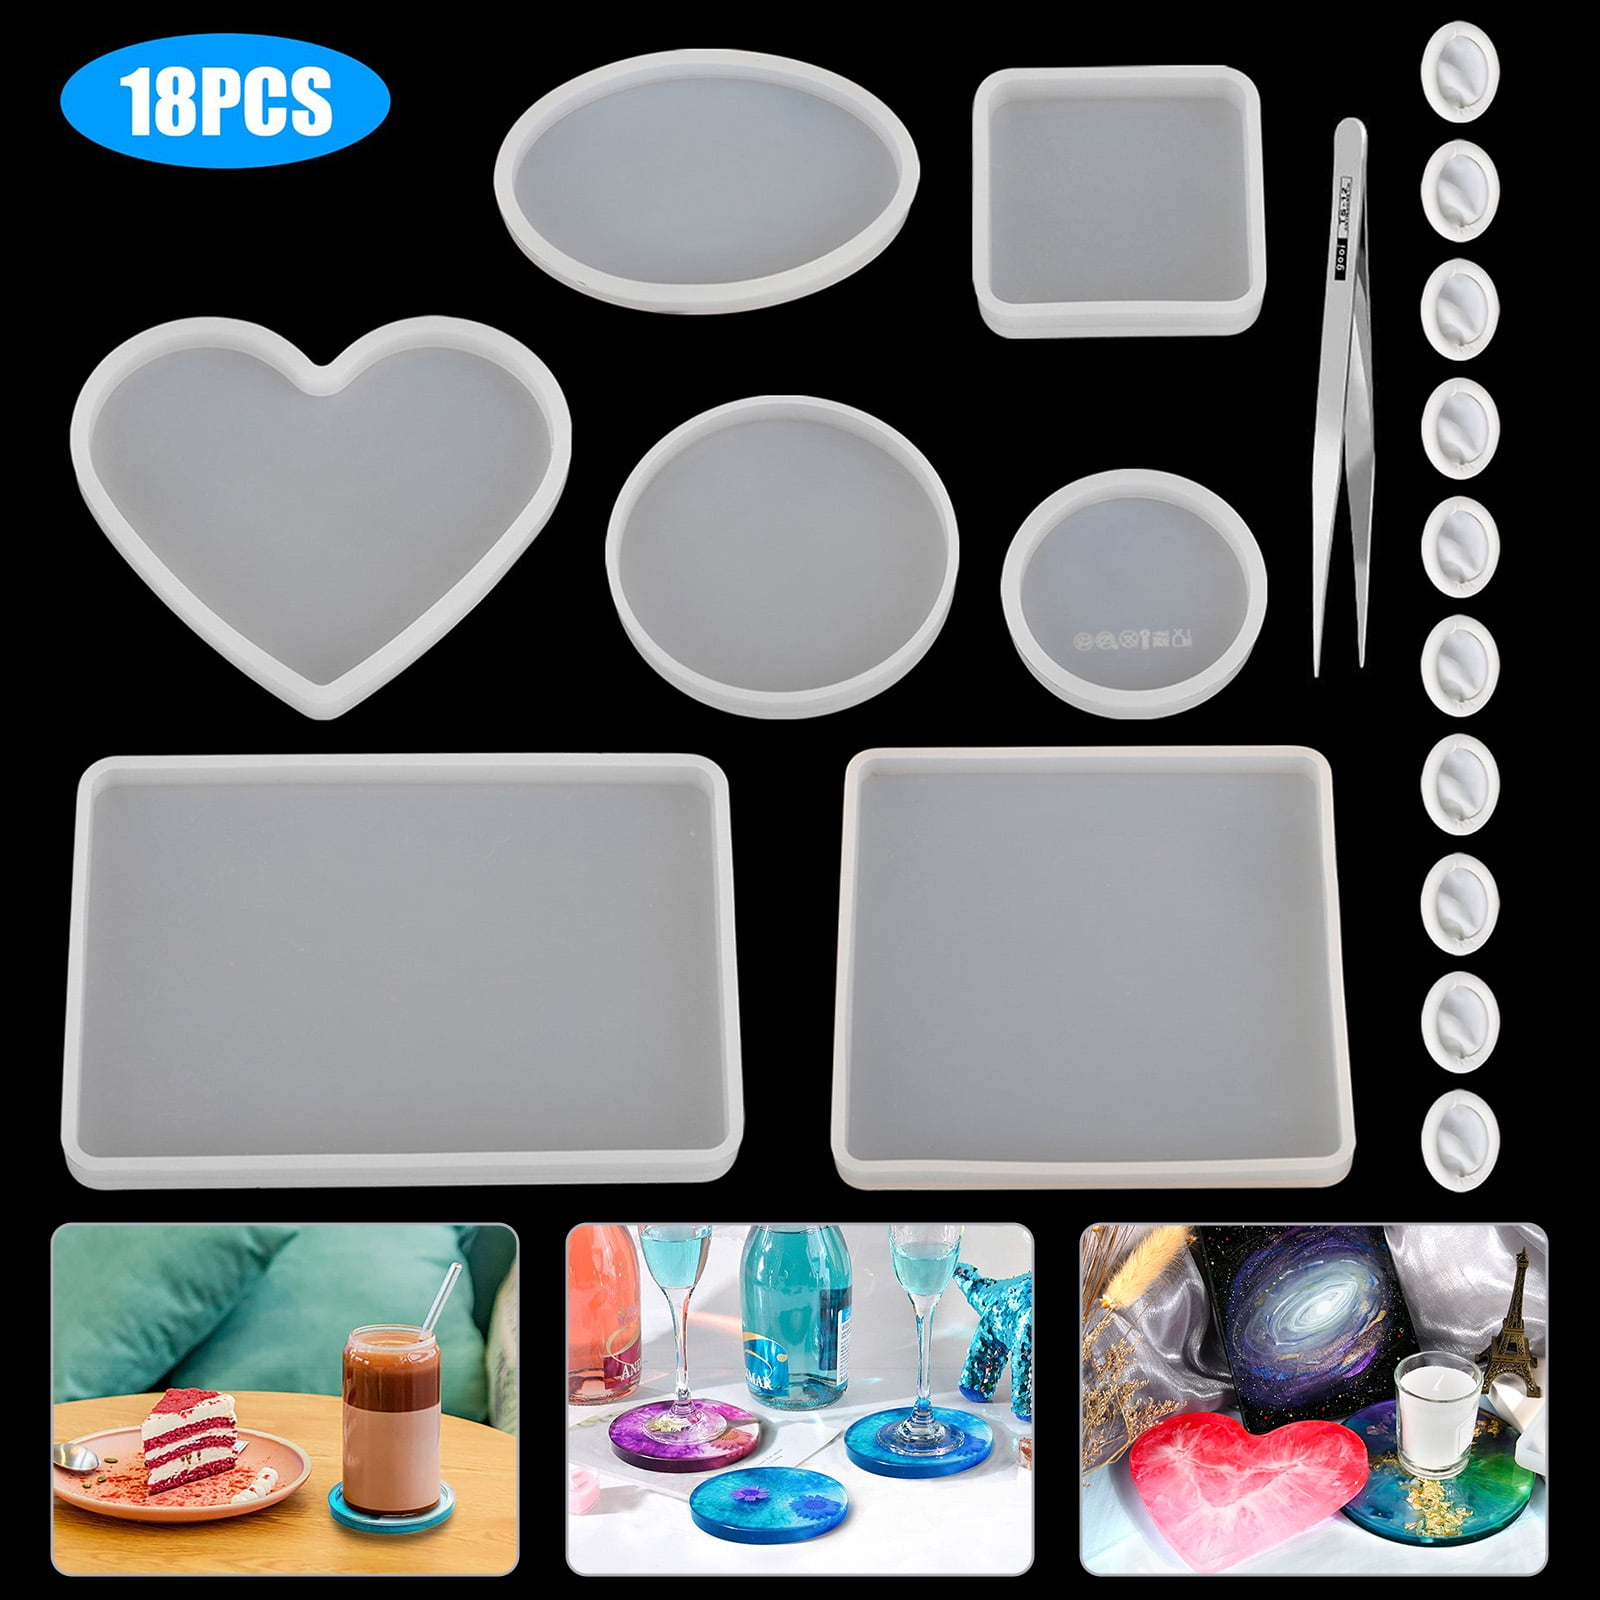 LET'S RESIN Coaster Mold Kit With 10pcs Square and Round Coaster Molds Set,  Coaster Holder Molds for Resin Casting,cups Mats,home Decoration 